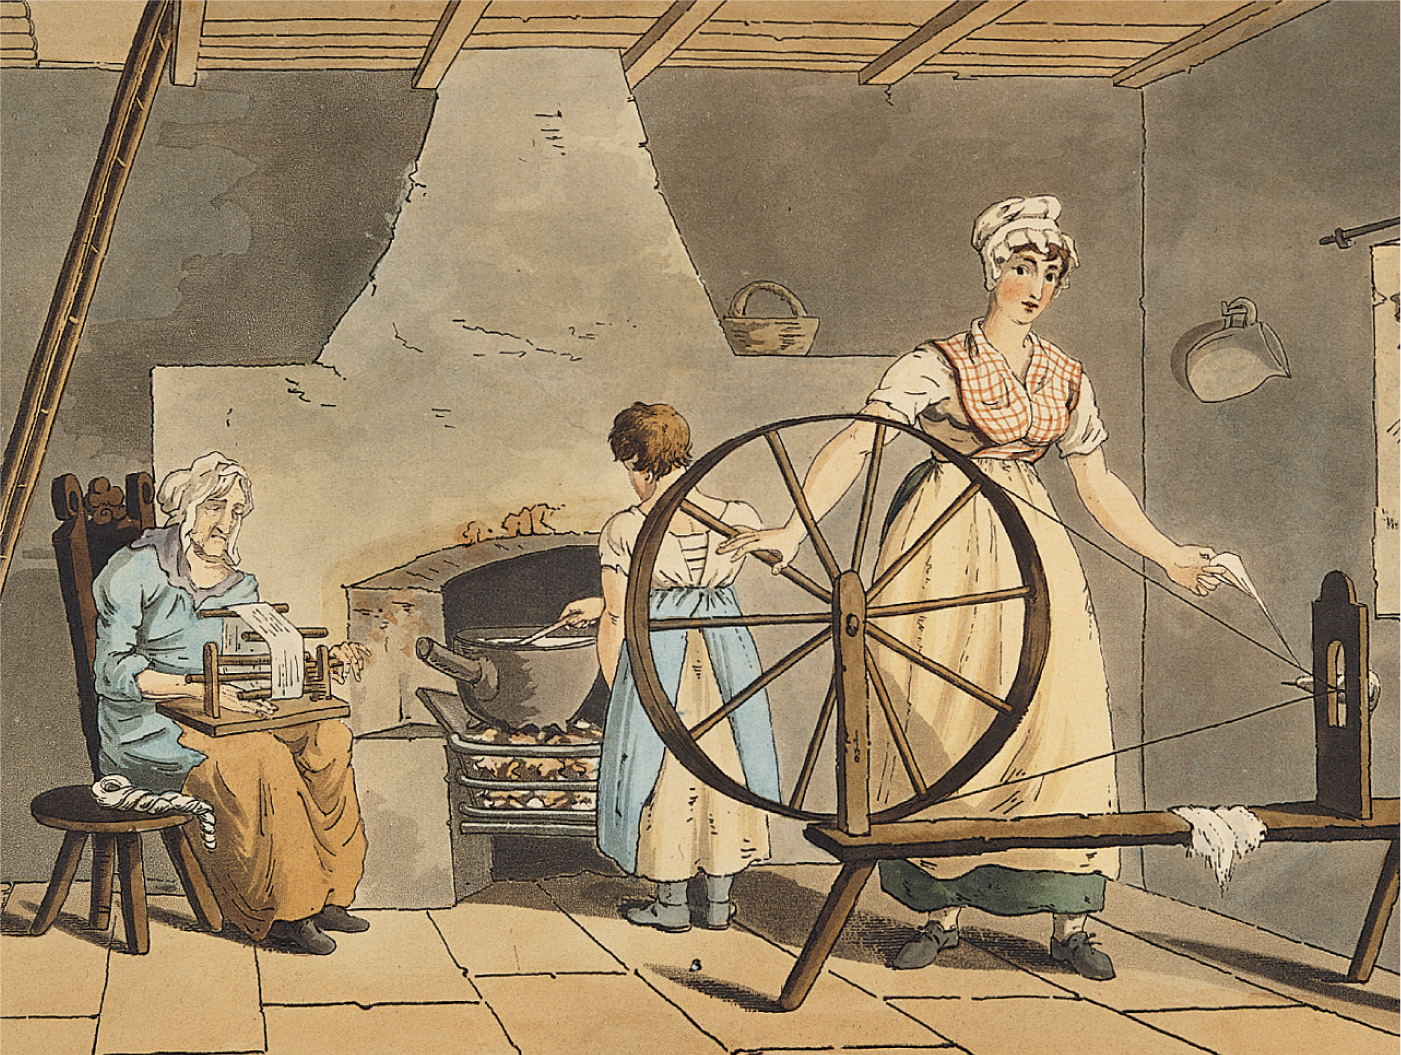 In a painting, a woman uses a
spinning wheel, while her daughter stirs a pot cooking in an open fireplace.